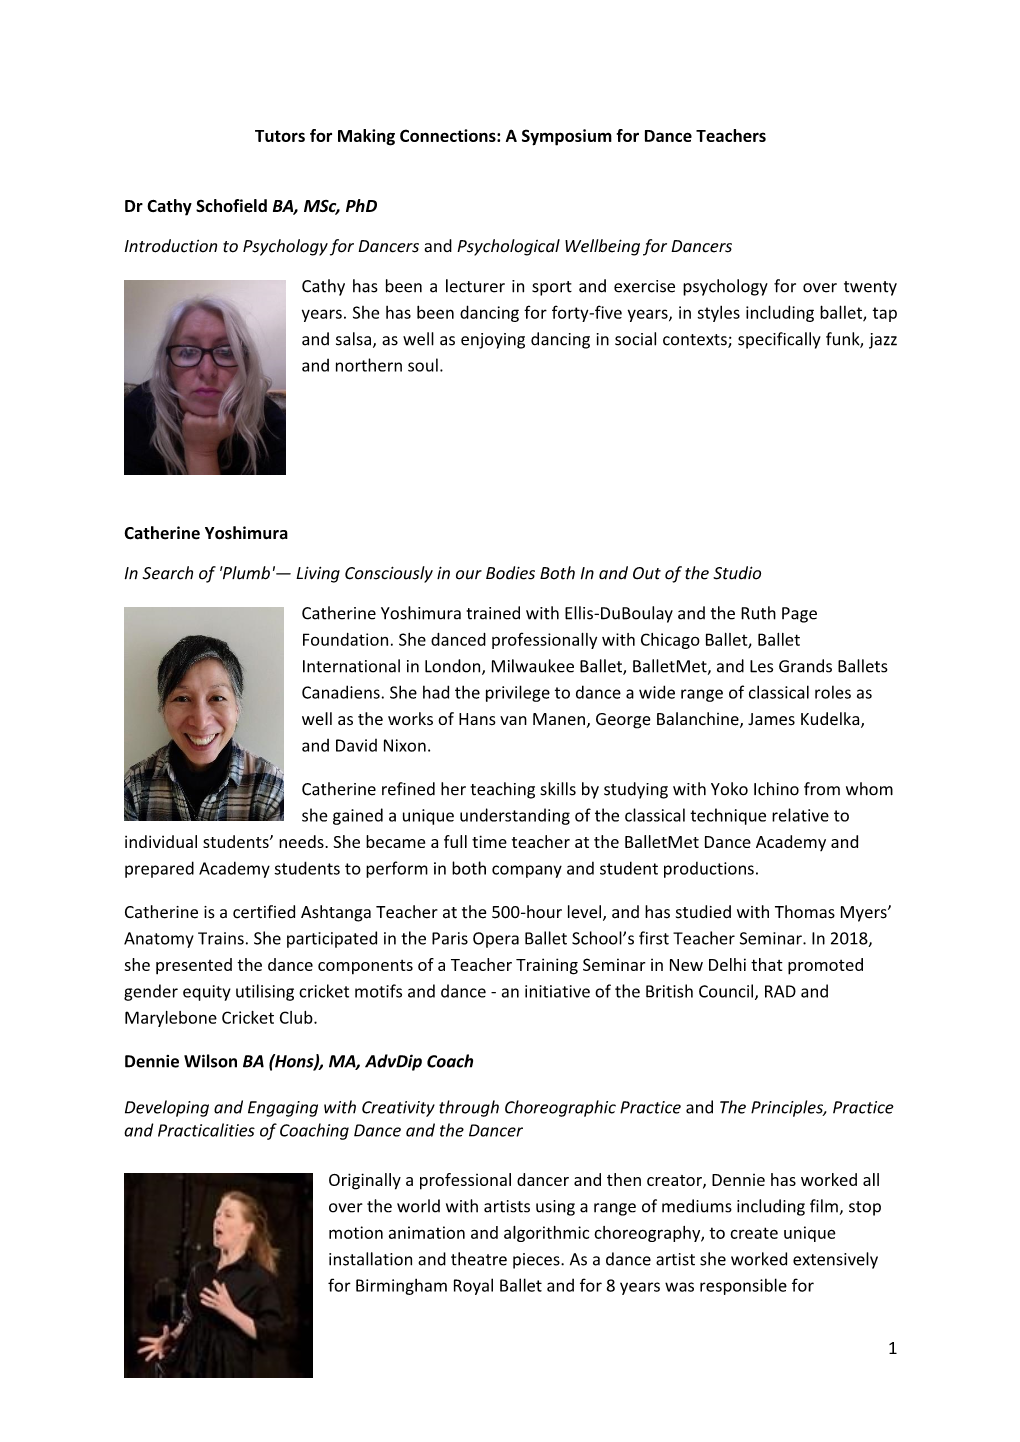 1 Tutors for Making Connections: a Symposium for Dance Teachers Dr